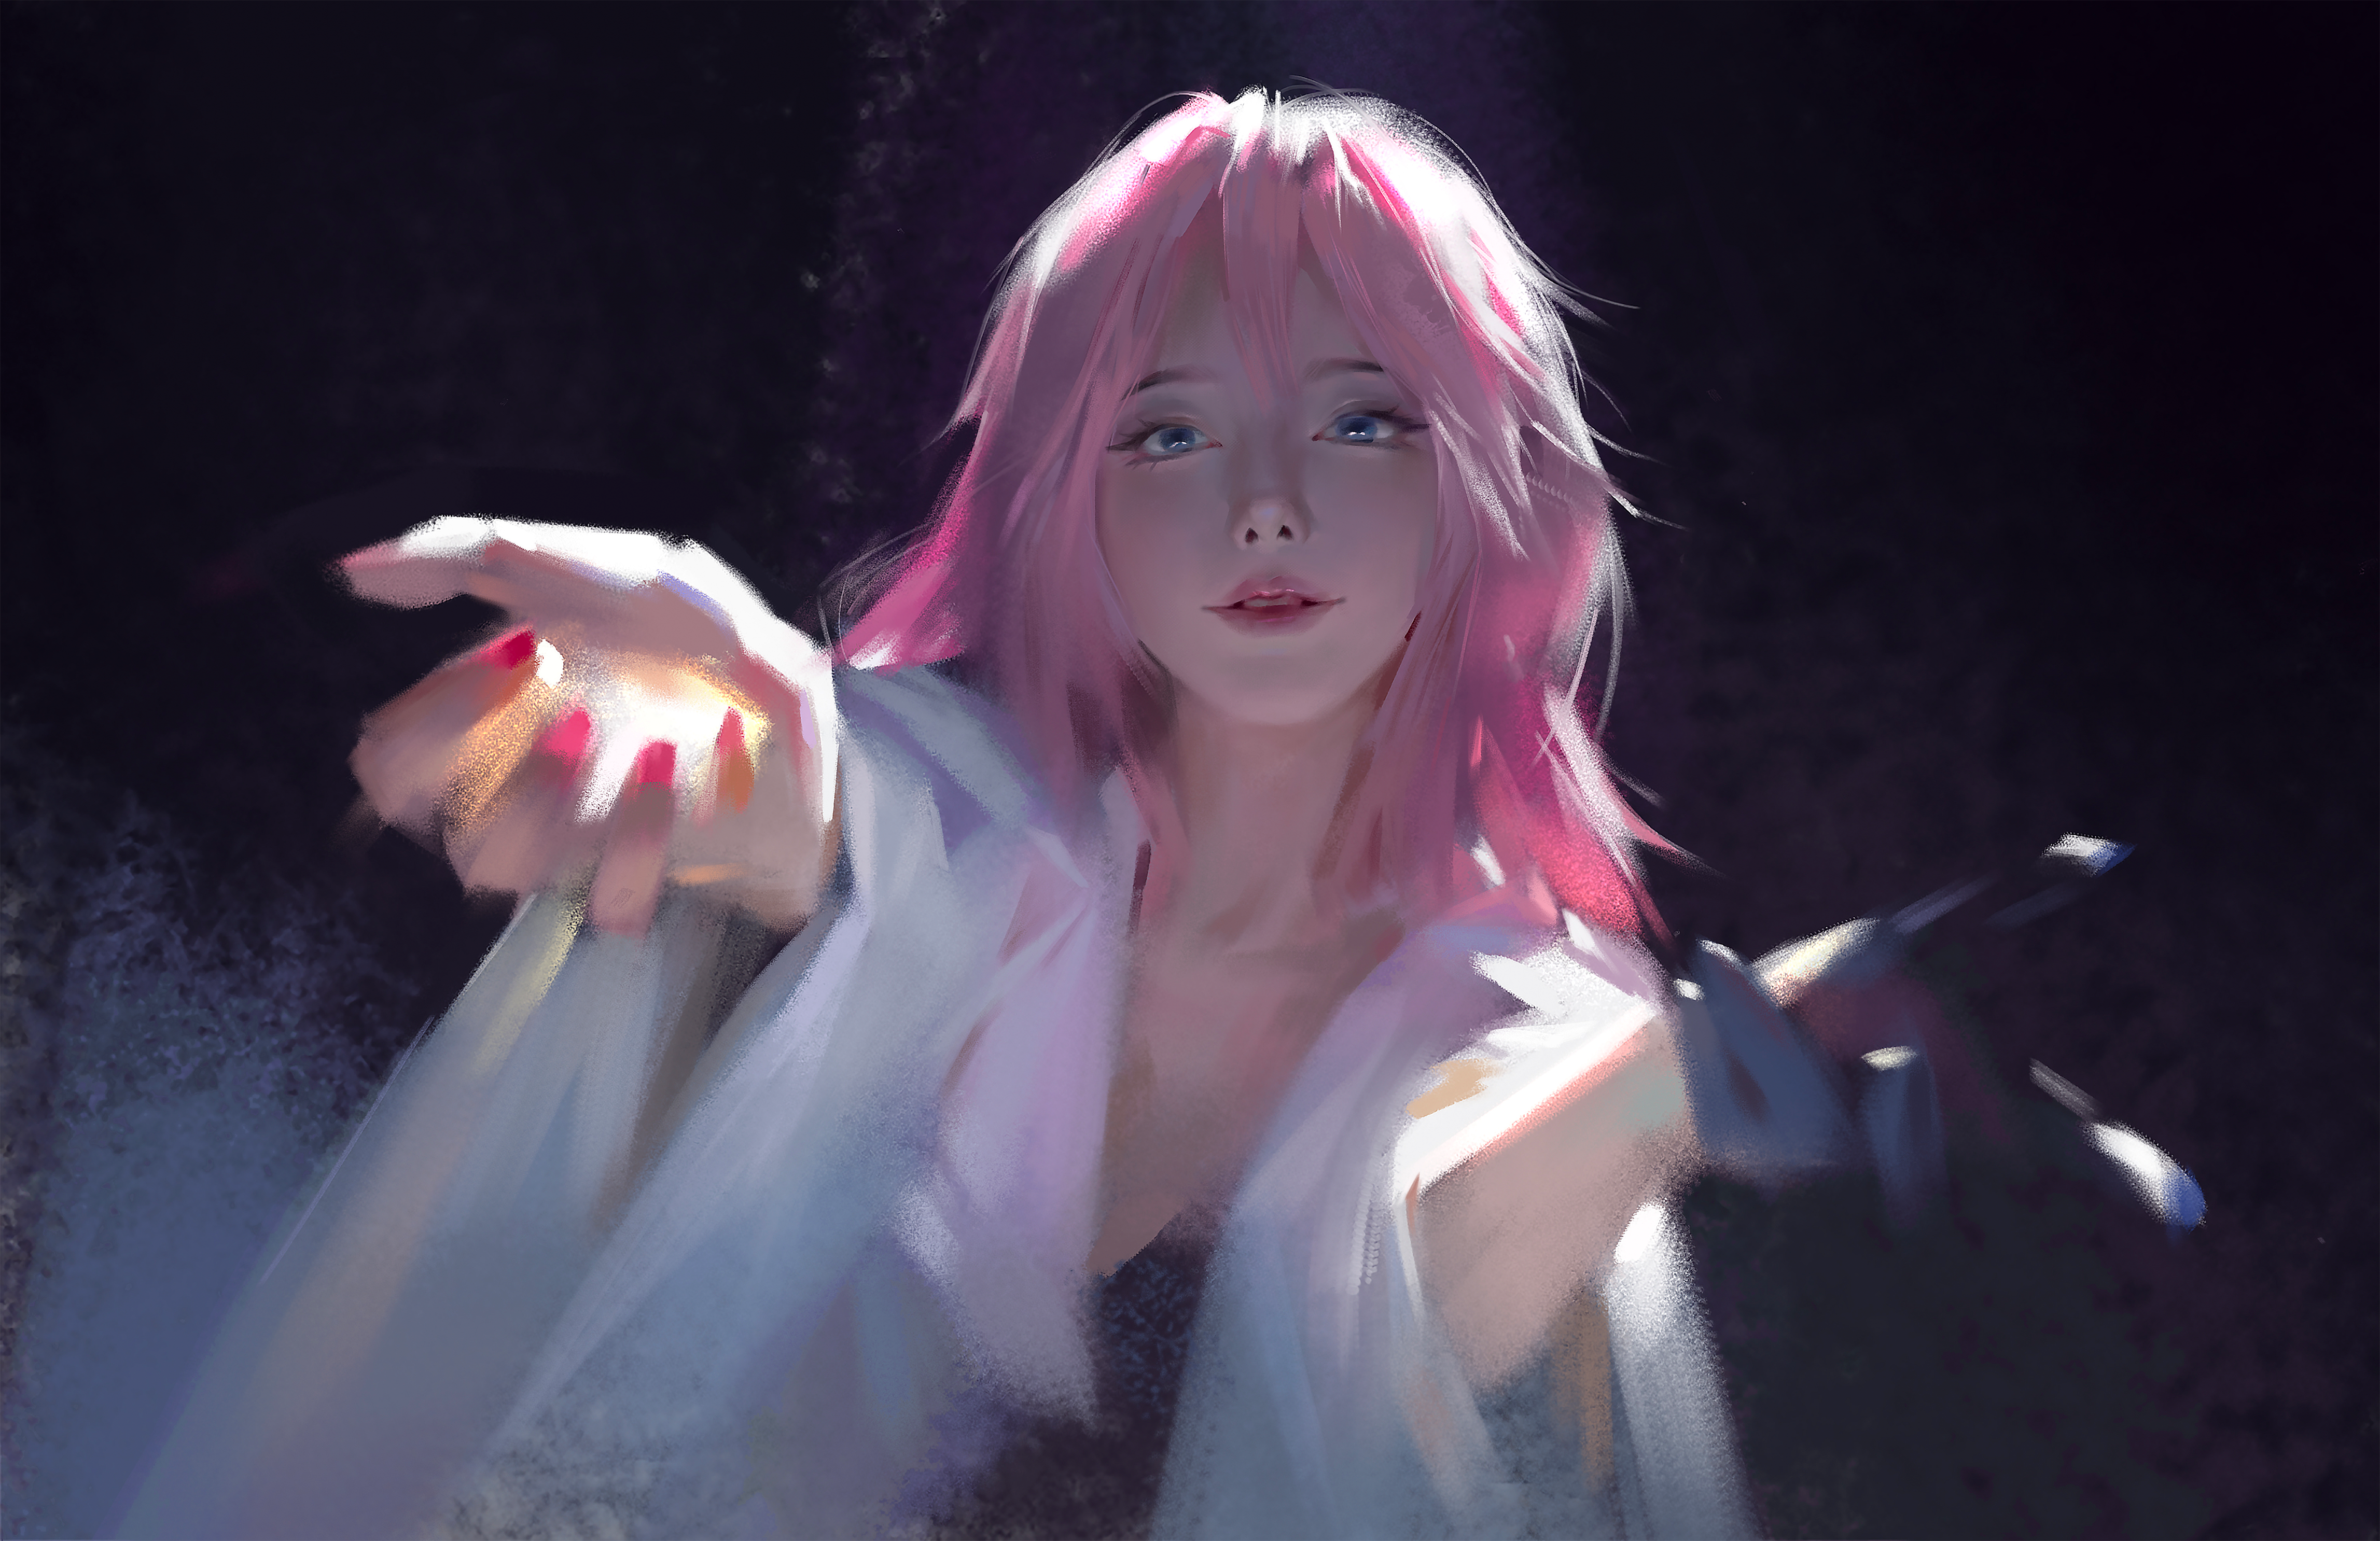 General 4589x2972 Wang Xiao digital art artwork illustration women pink hair simple background open mouth Asian looking at viewer arms reaching people anime boys